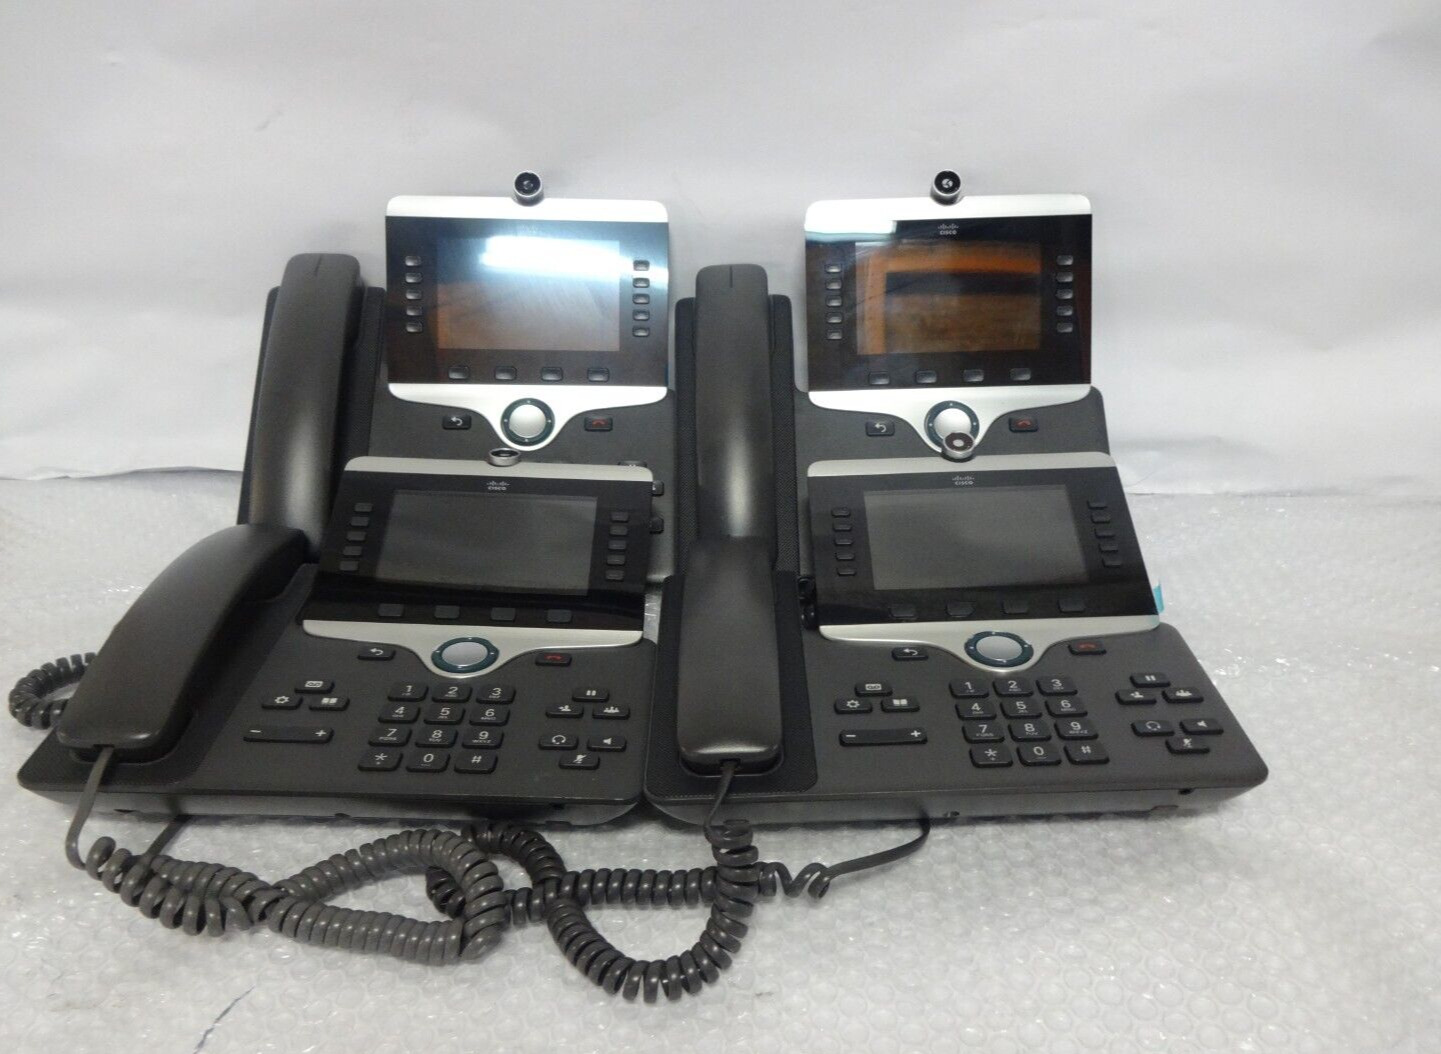 LOT OF 4 CISCO CP-8845-K9 5 LINE IP VIDEO CONFERENCE PHONE W/ STAND